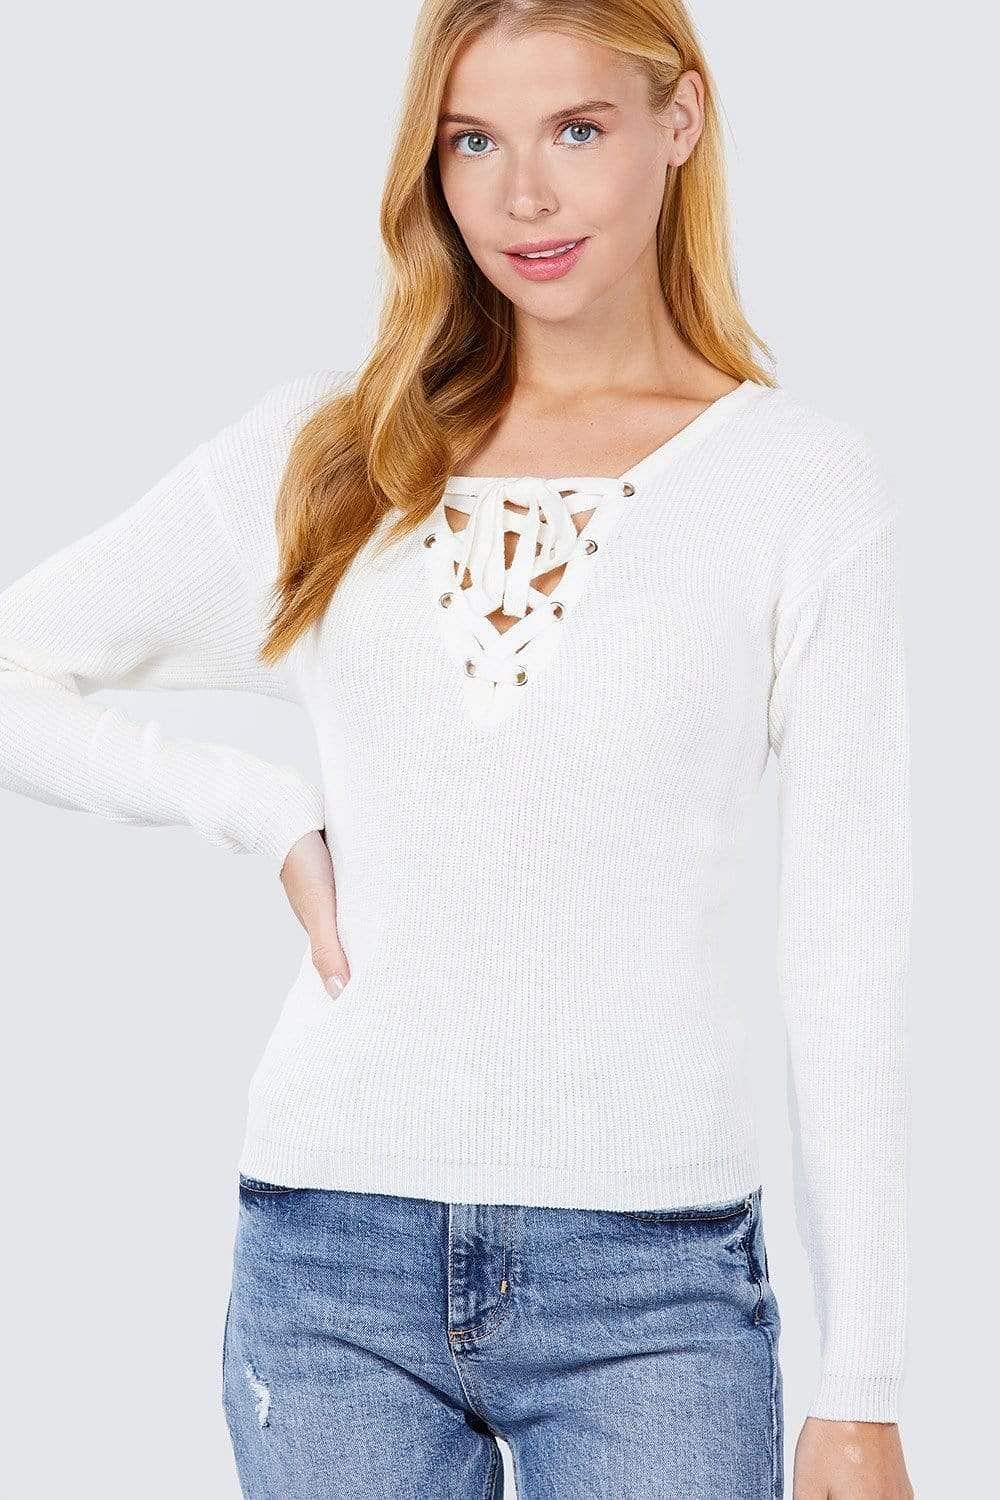 White Long Sleeve Eyelet Strap V-Neck Sweater - Shopping Therapy L